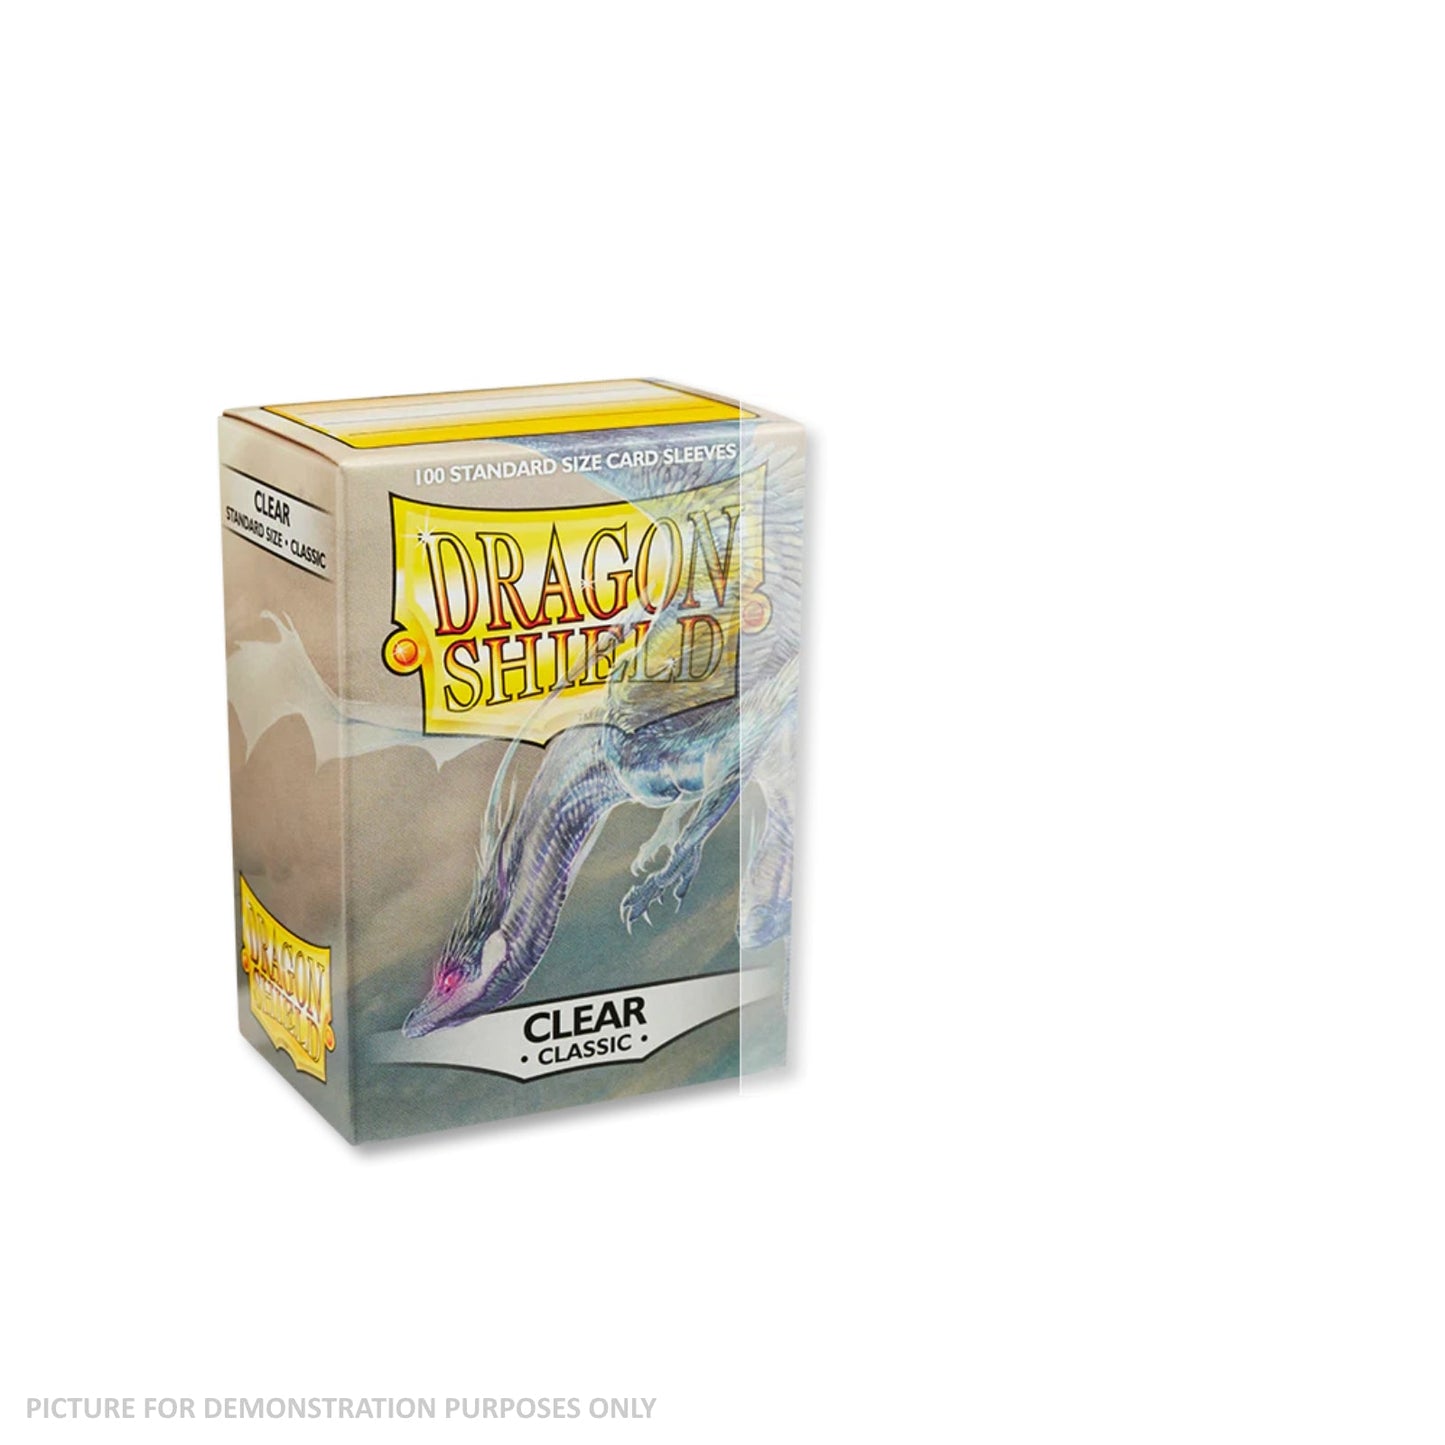 Dragon Shield 100 Standard Size Card Sleeves - Classic Clear